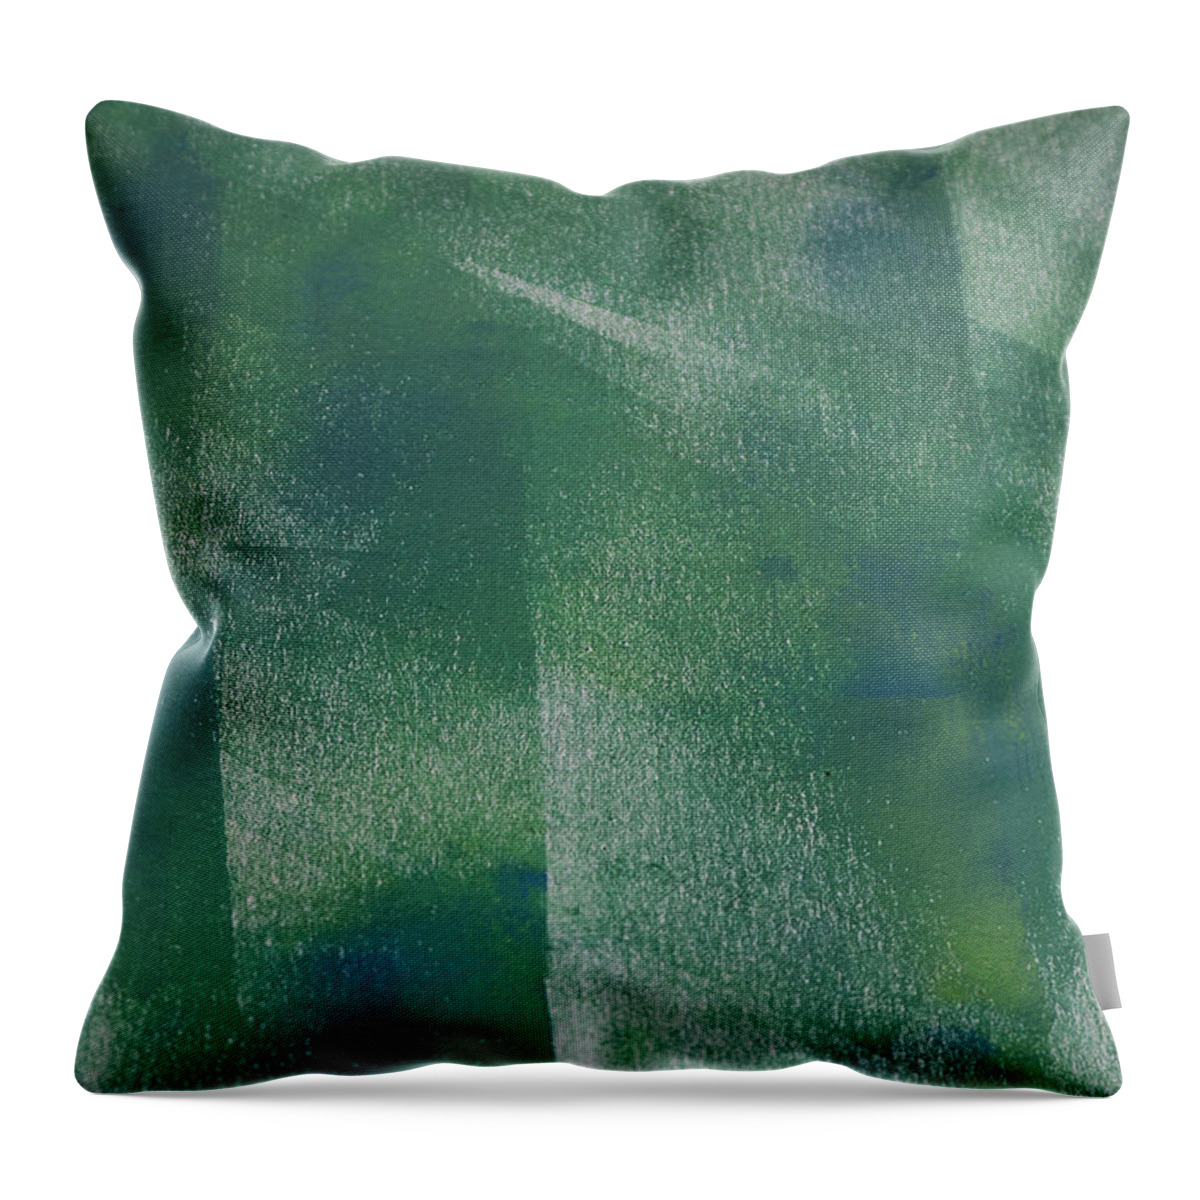 #spring#forest#mountains#abstract Throw Pillow featuring the painting Spring Forest by Katherine Y Mangum